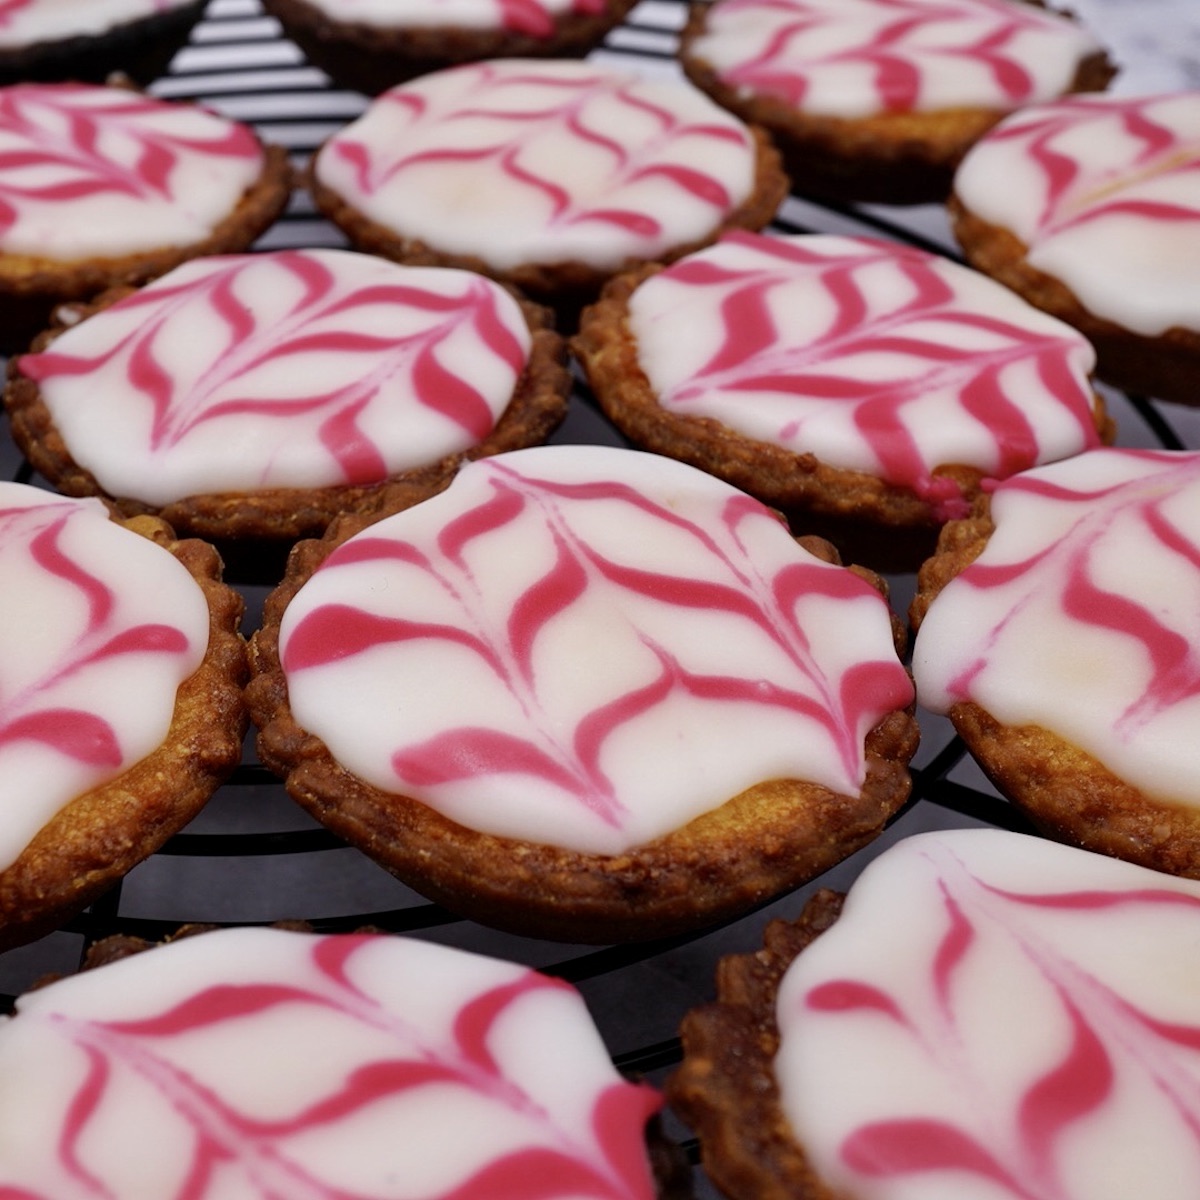 A group of iced Bakewell tarts.